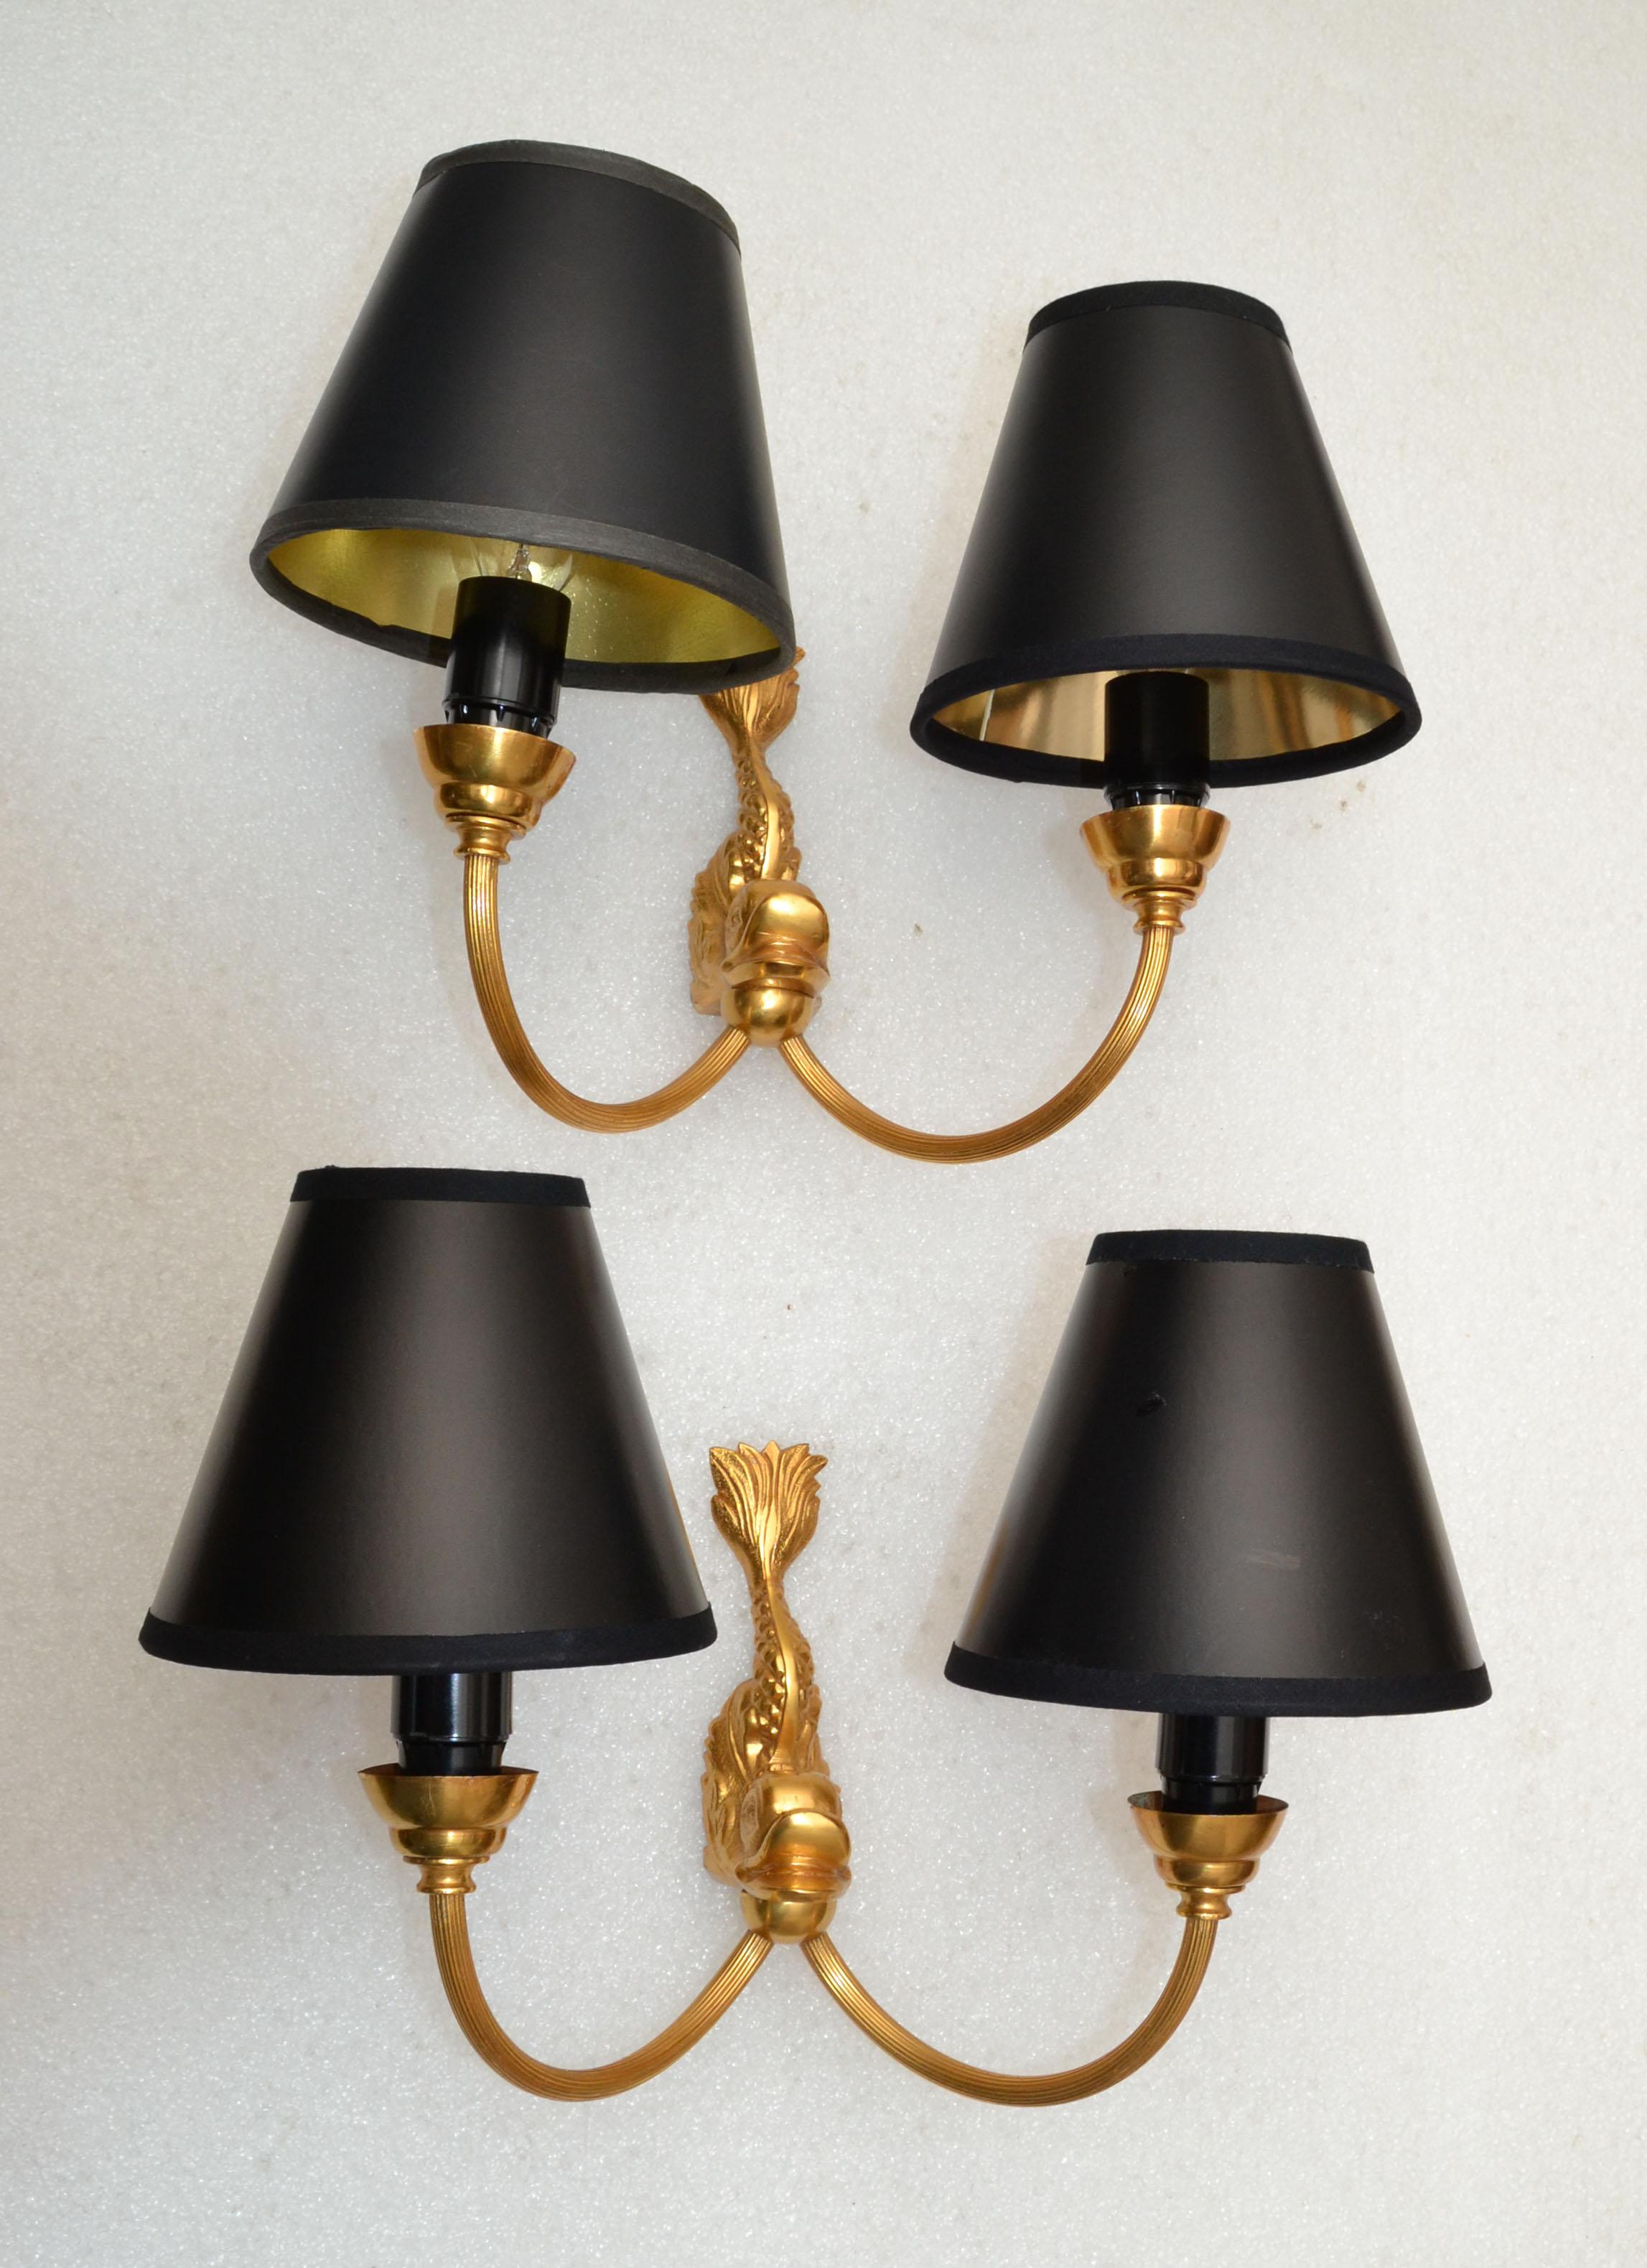 Maison Lancel 2 Light Brass Dolphin Sconces Black Shade, France, 1950, Pair In Good Condition For Sale In Miami, FL